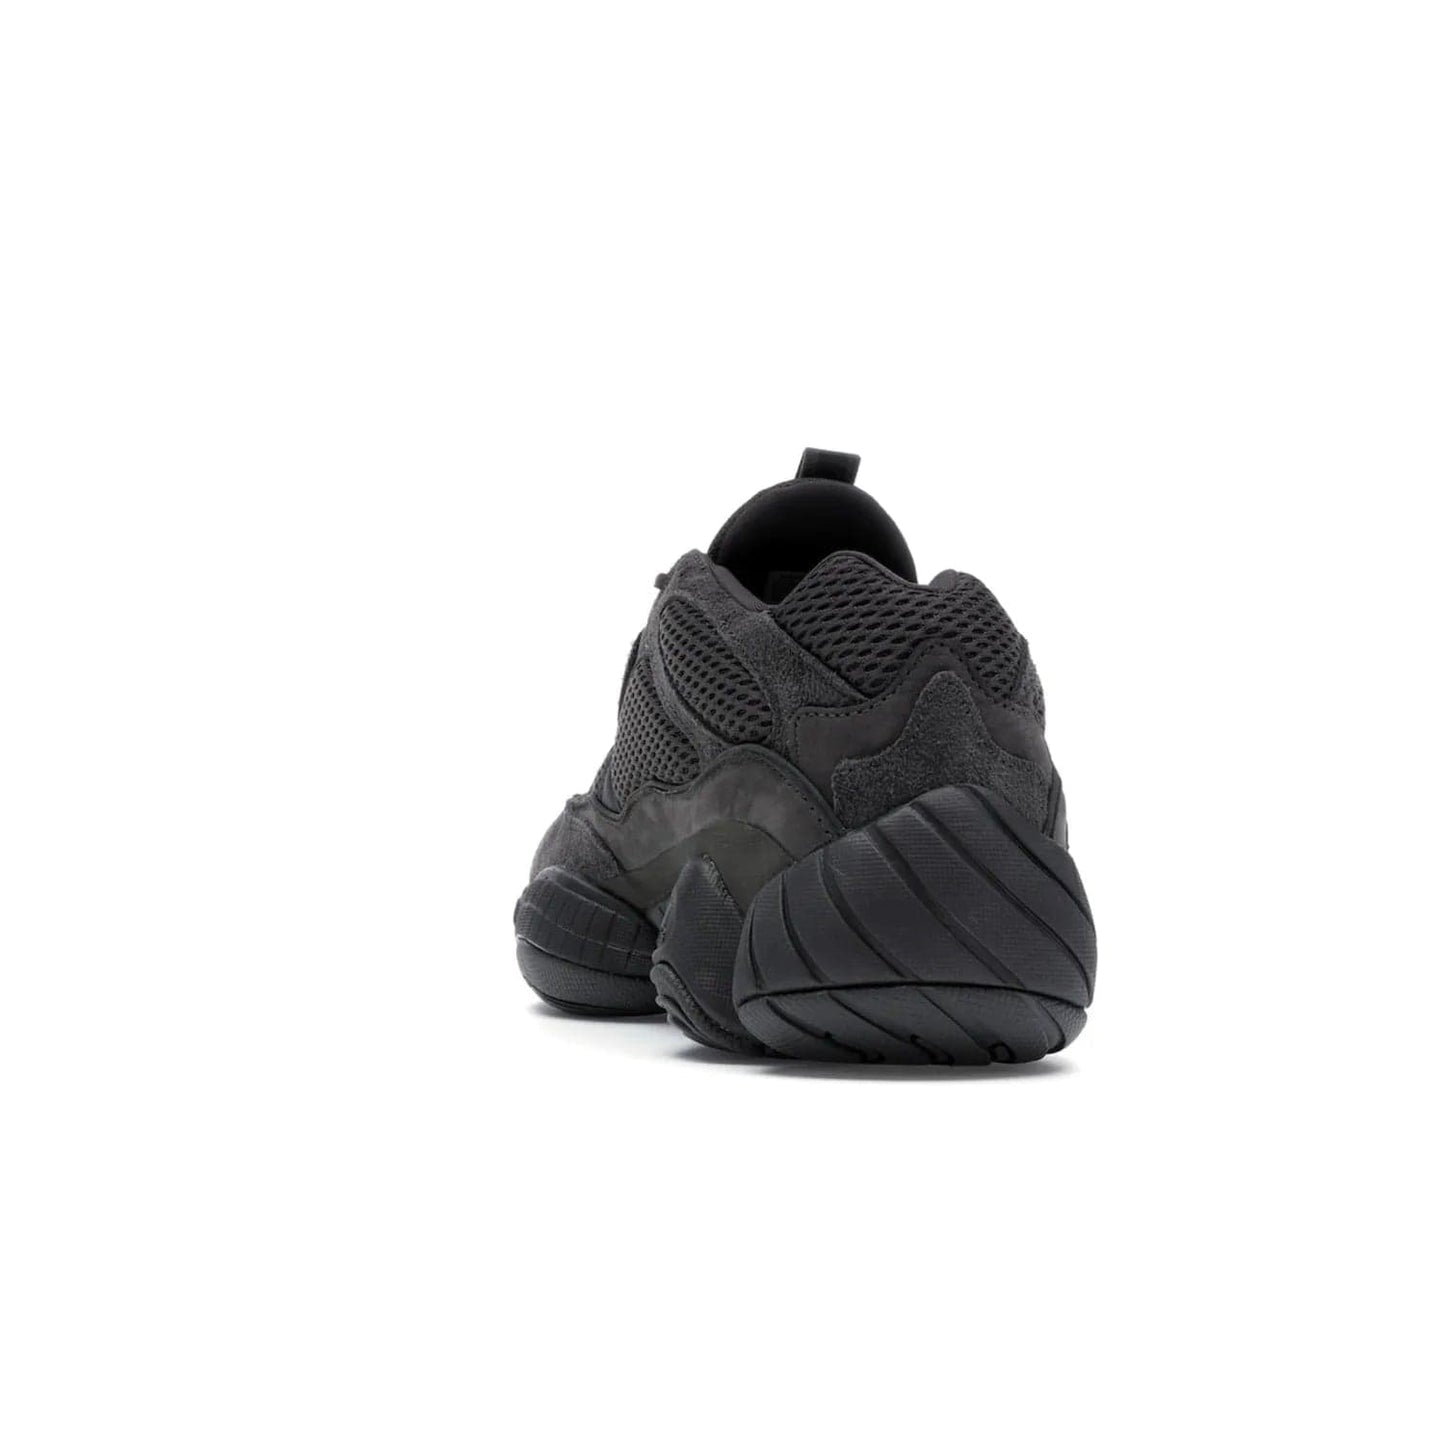 adidas Yeezy 500 Utility Black - Image 27 - Only at www.BallersClubKickz.com - Iconic adidas Yeezy 500 Utility Black in All-Black colorway. Durable black mesh and suede upper with adiPRENE® sole delivers comfort and support. Be unstoppable with the Yeezy 500 Utility Black. Released July 2018.